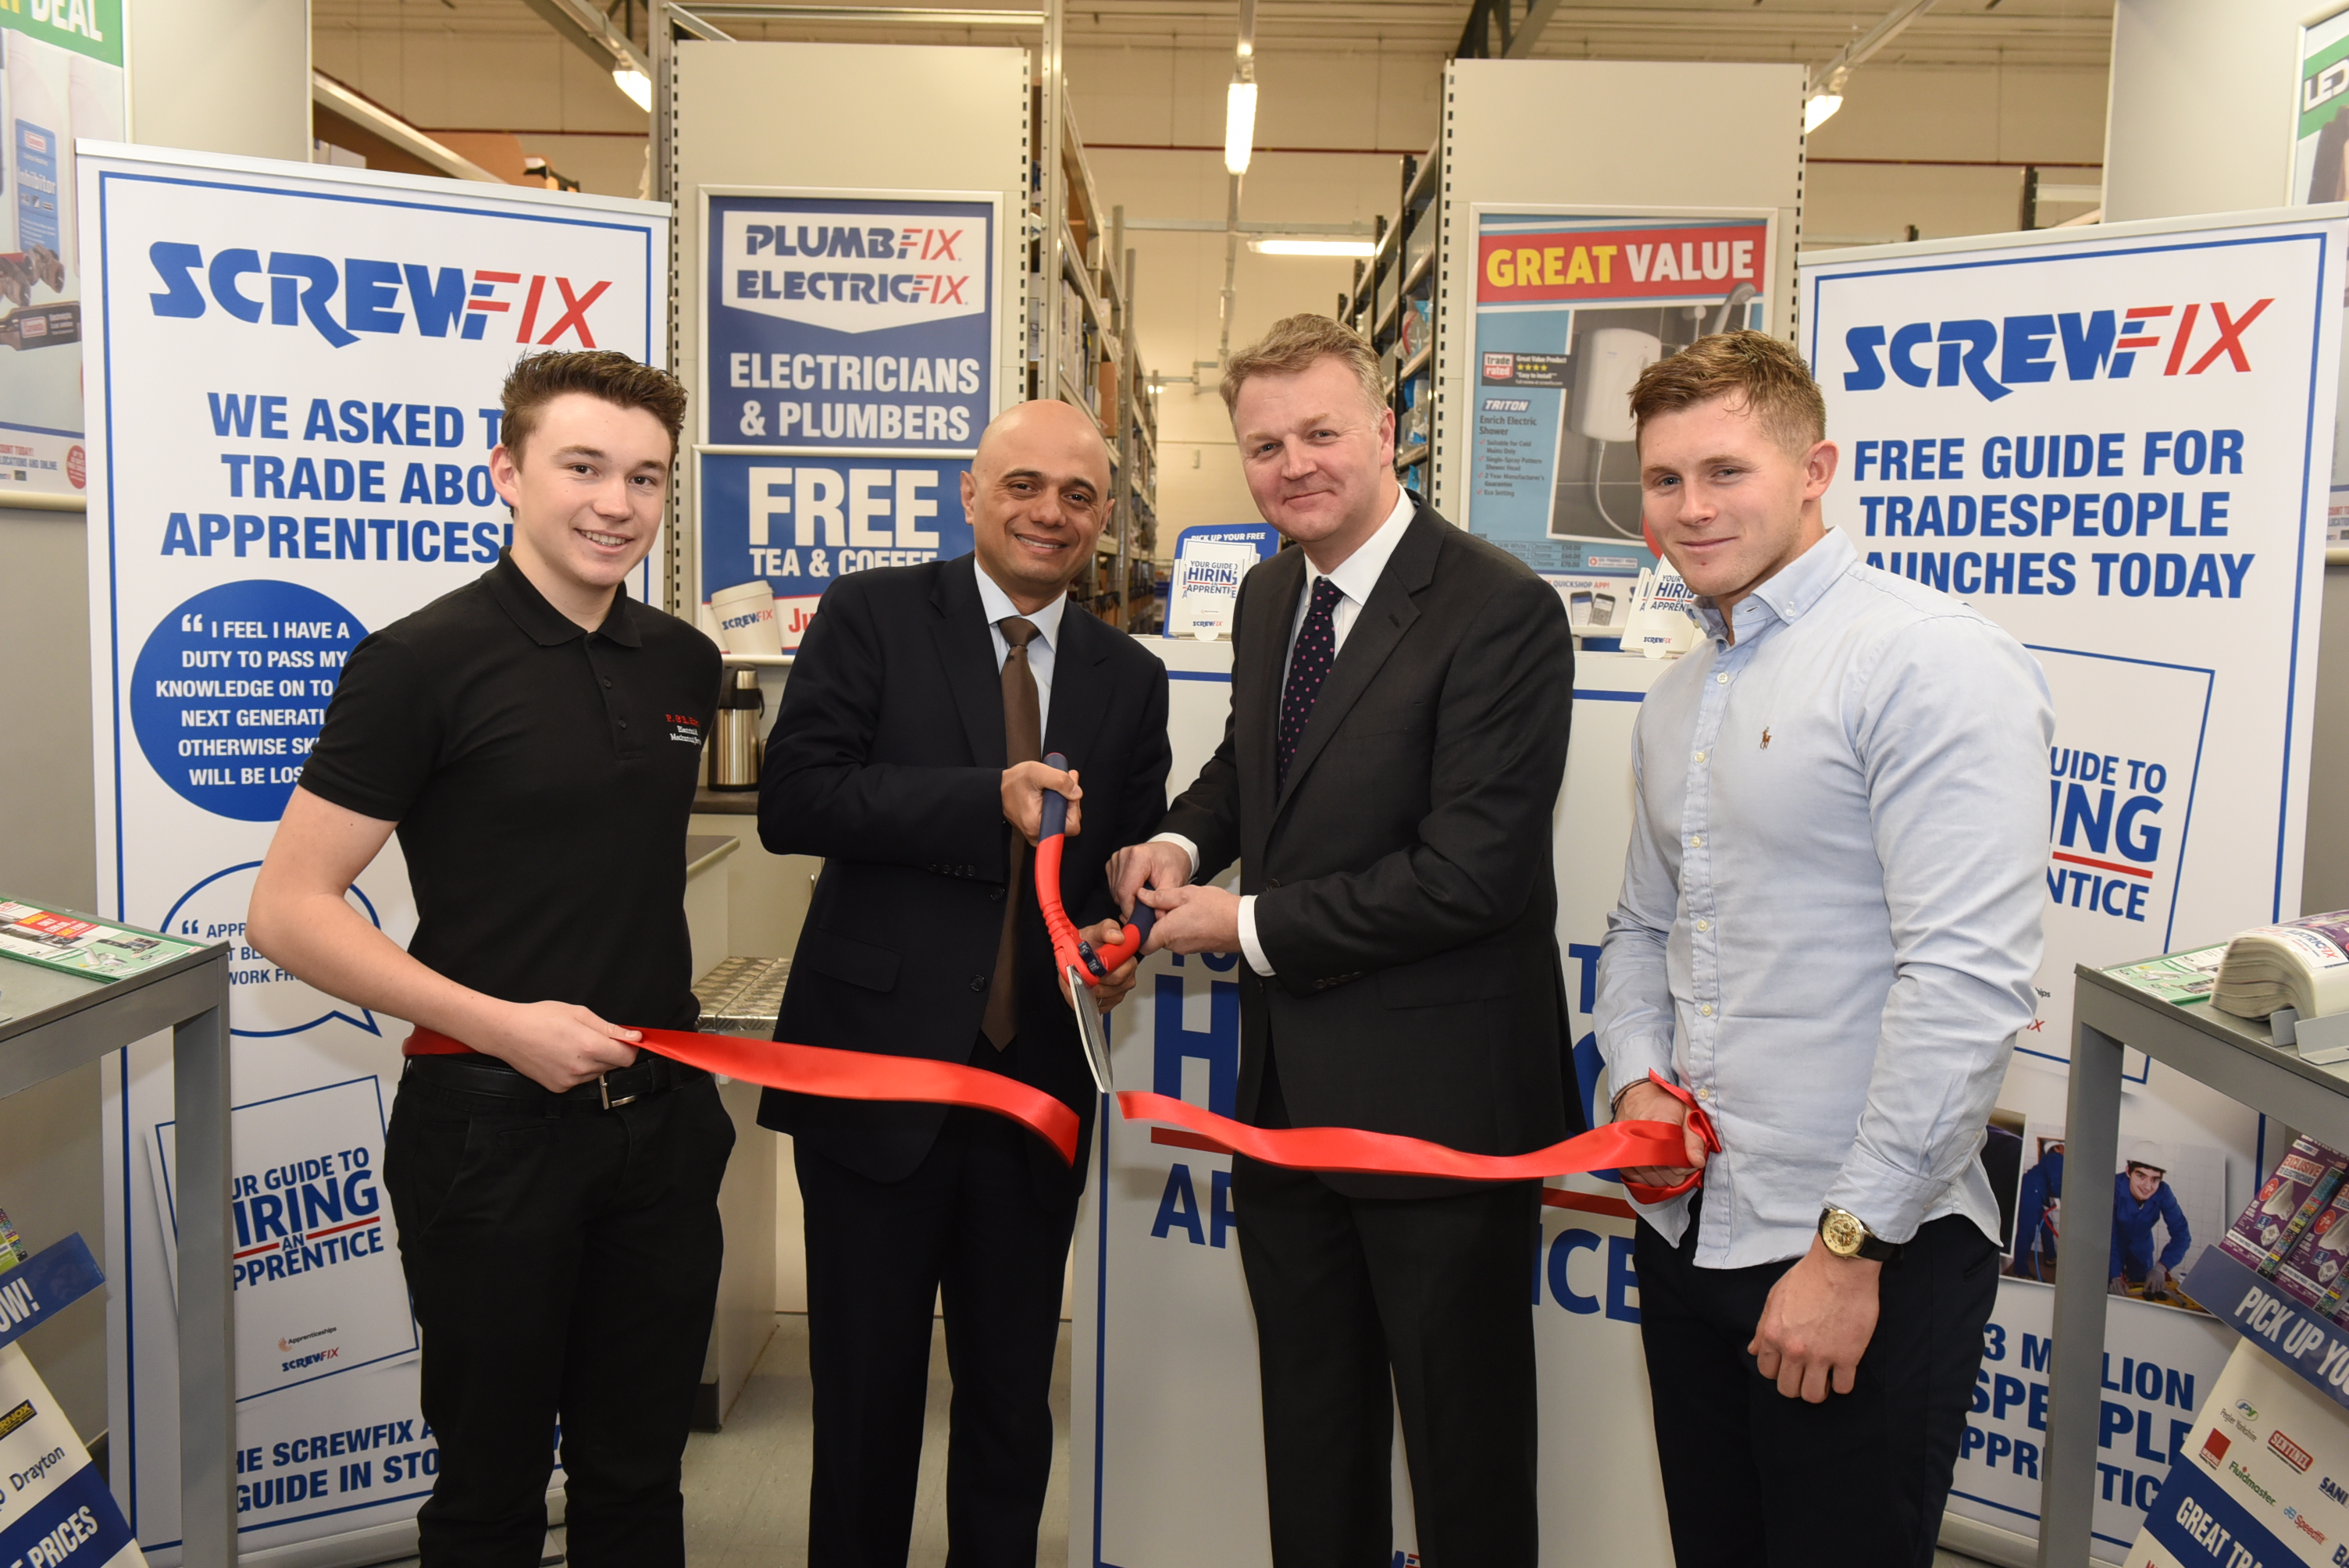 Apprentice electrician from Ilminster joins Business Secretary for launch of apprentice guide